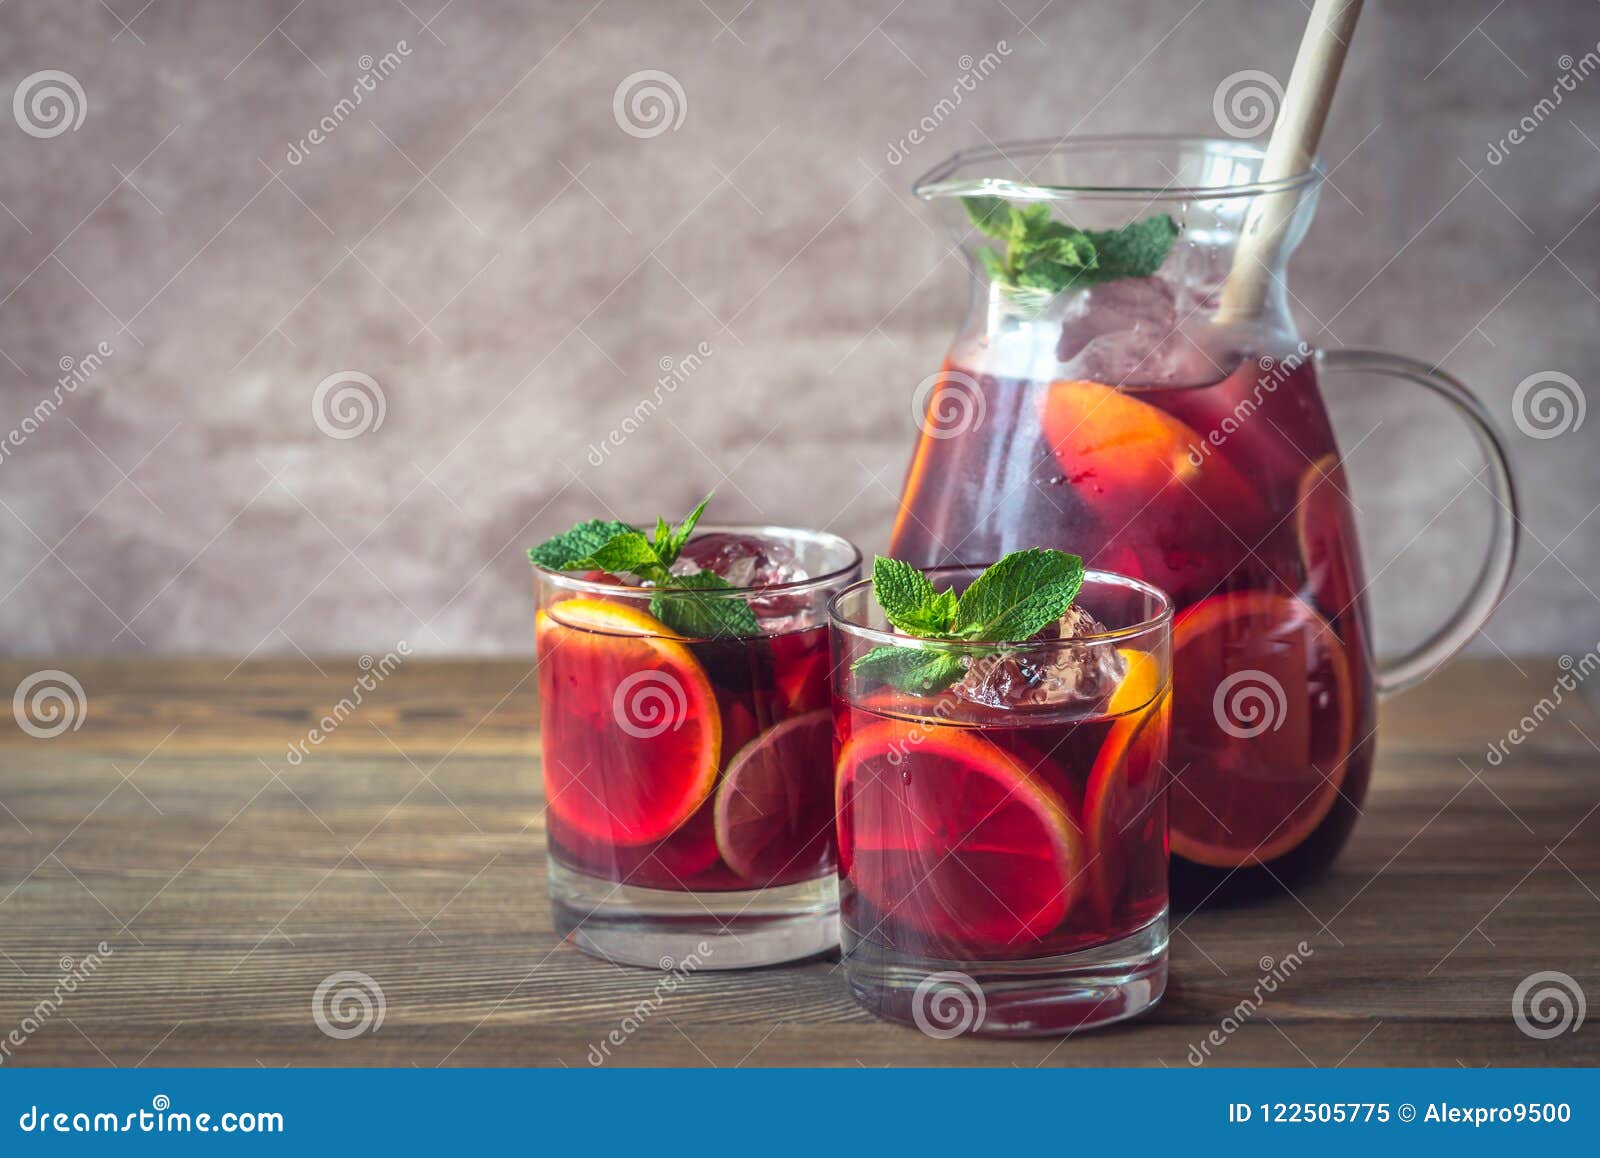 https://thumbs.dreamstime.com/z/pitcher-two-glasses-spanish-fruit-sangria-pitcher-two-glasses-spanish-sangria-122505775.jpg